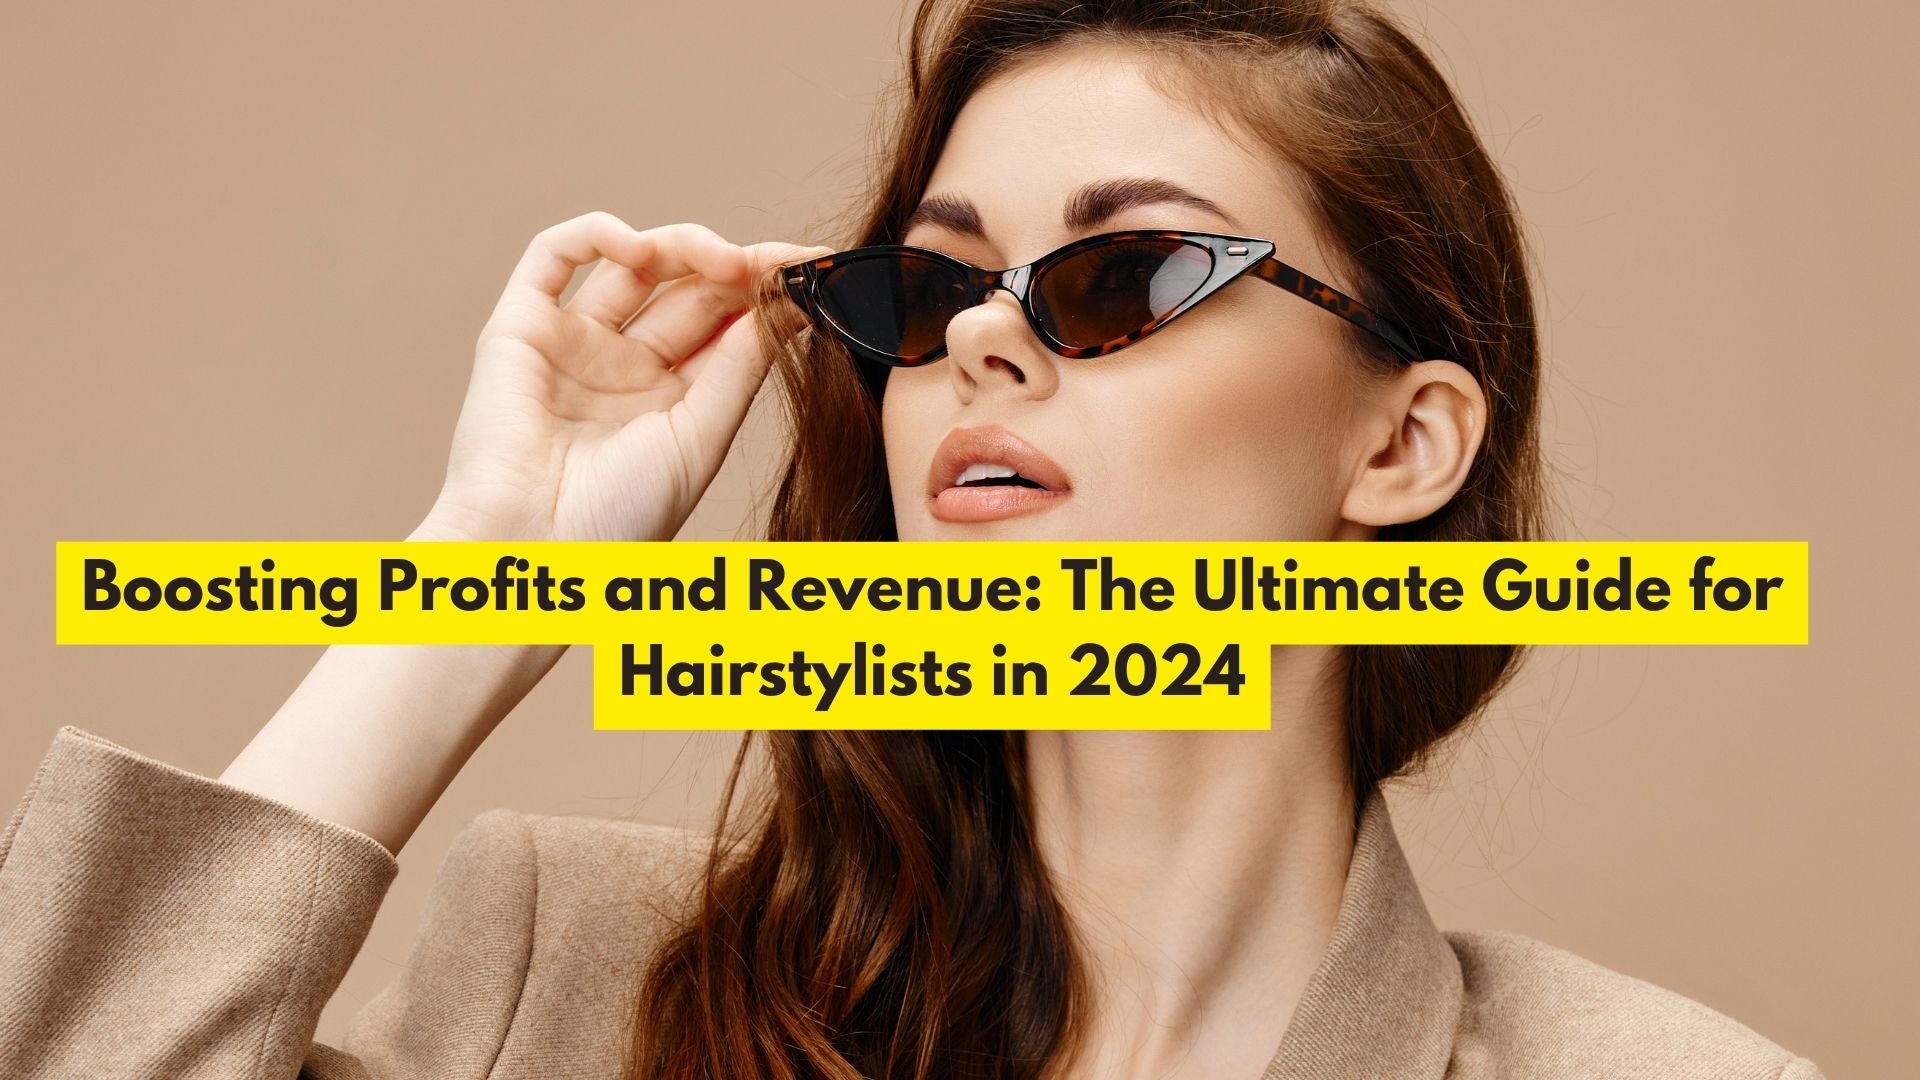 Boosting Profits and Revenue: The Ultimate Guide for Hairstylists in 2024